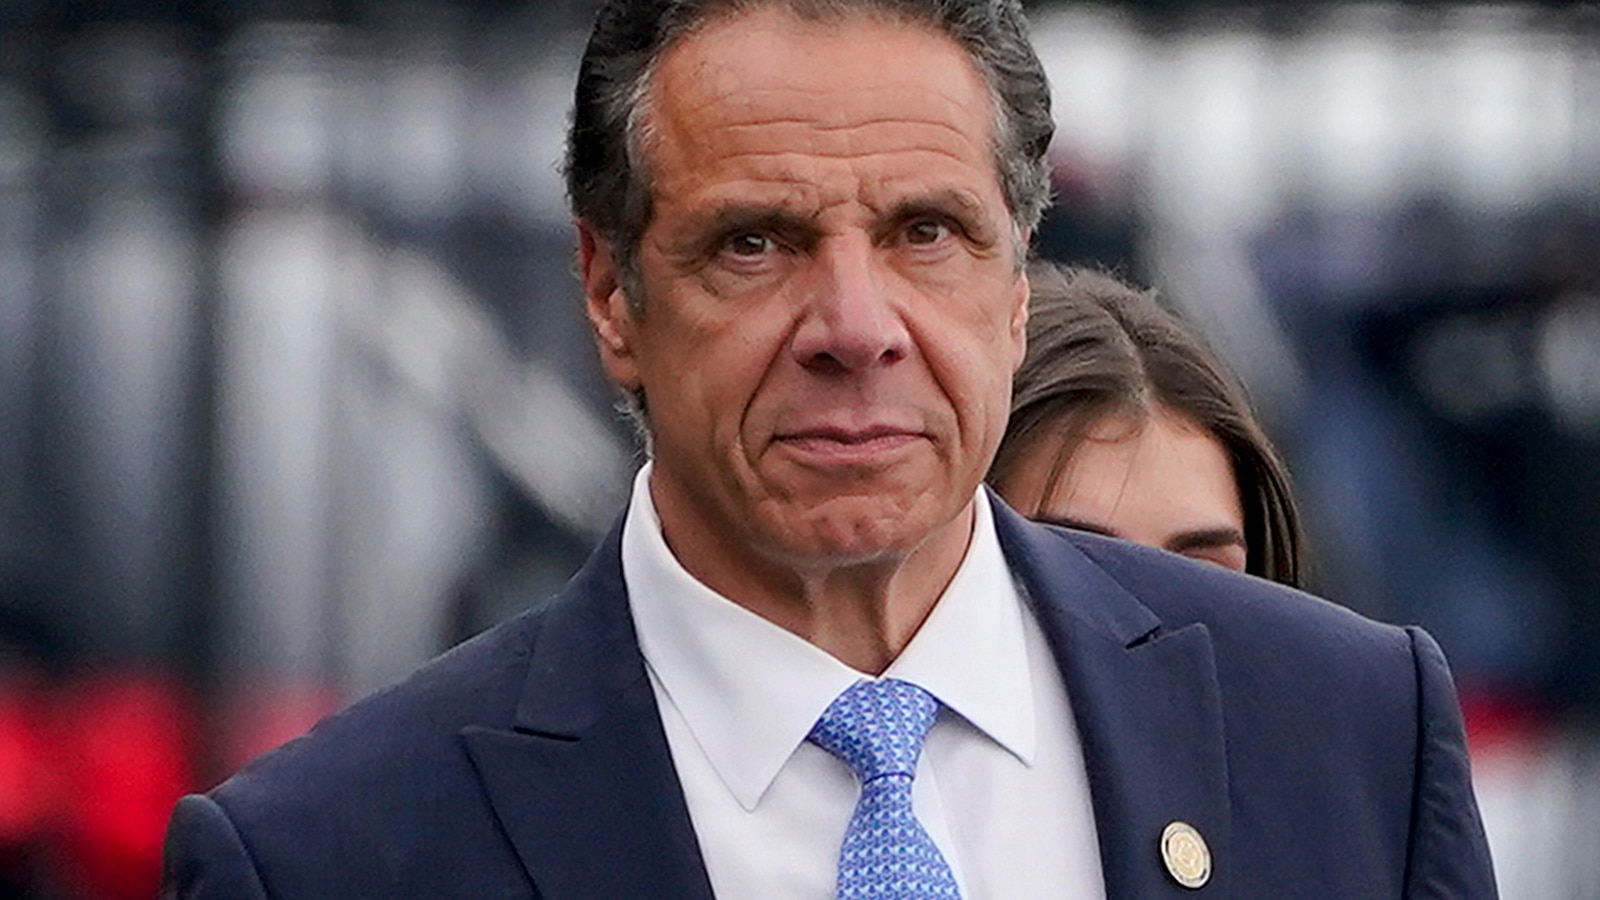 Justice Department Investigation Reveals Sexual Harassment by Cuomo, Resulting in Settlement with NY State